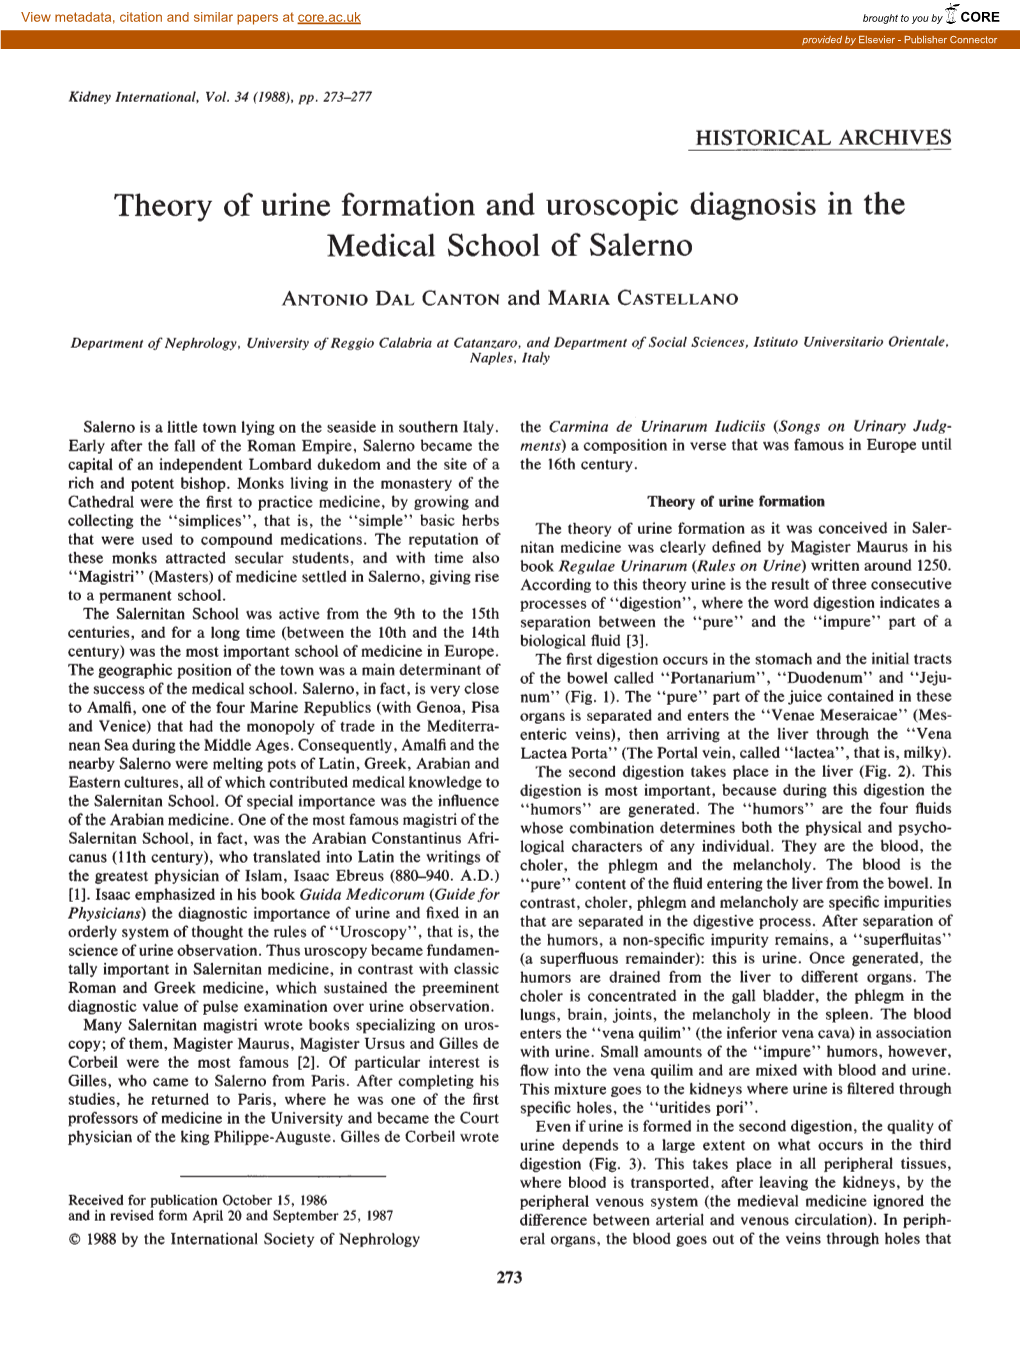 Theory of Urine Formation and Uroscopic Diagnosis in the Medical School of Salerno